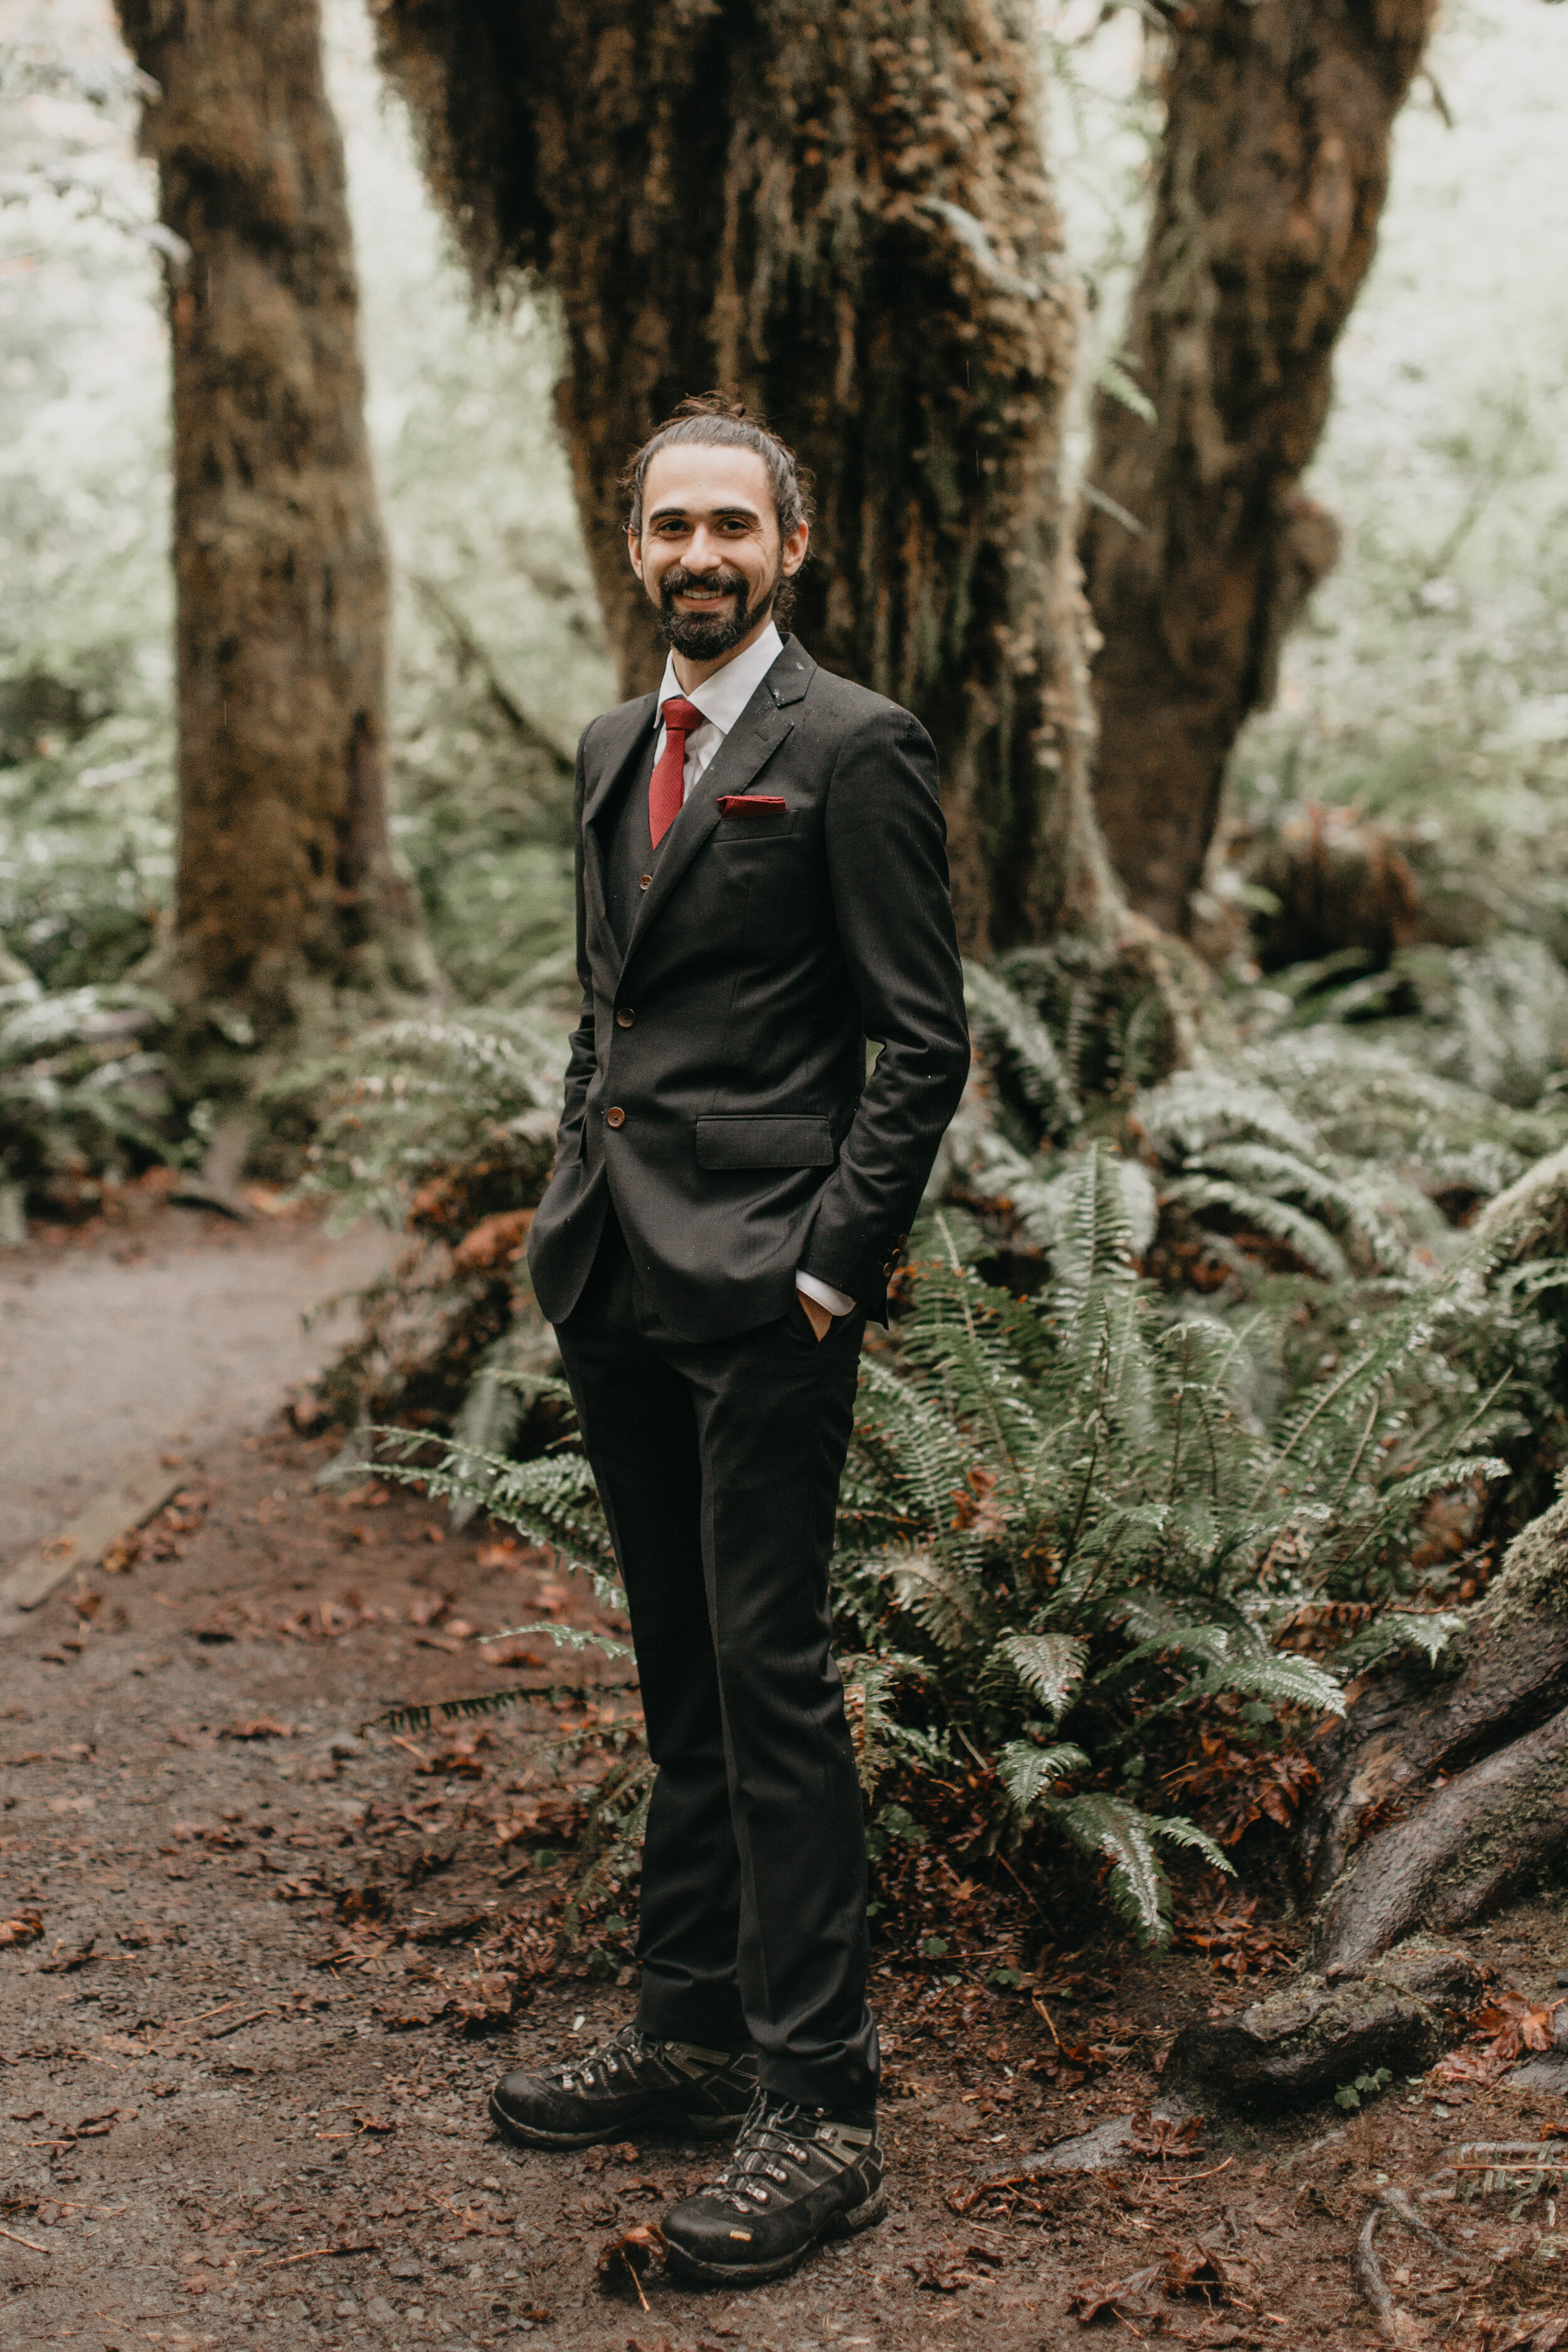 Nicole-Daacke-Photography-Olympic-national-park-elopement-photography-intimiate-elopement-in-olympic-peninsula-washington-state-rainy-day-ruby-beach-hoh-rainforest-elopement-inspiration-rainforest-pnw-elopement-photography-125.jpg